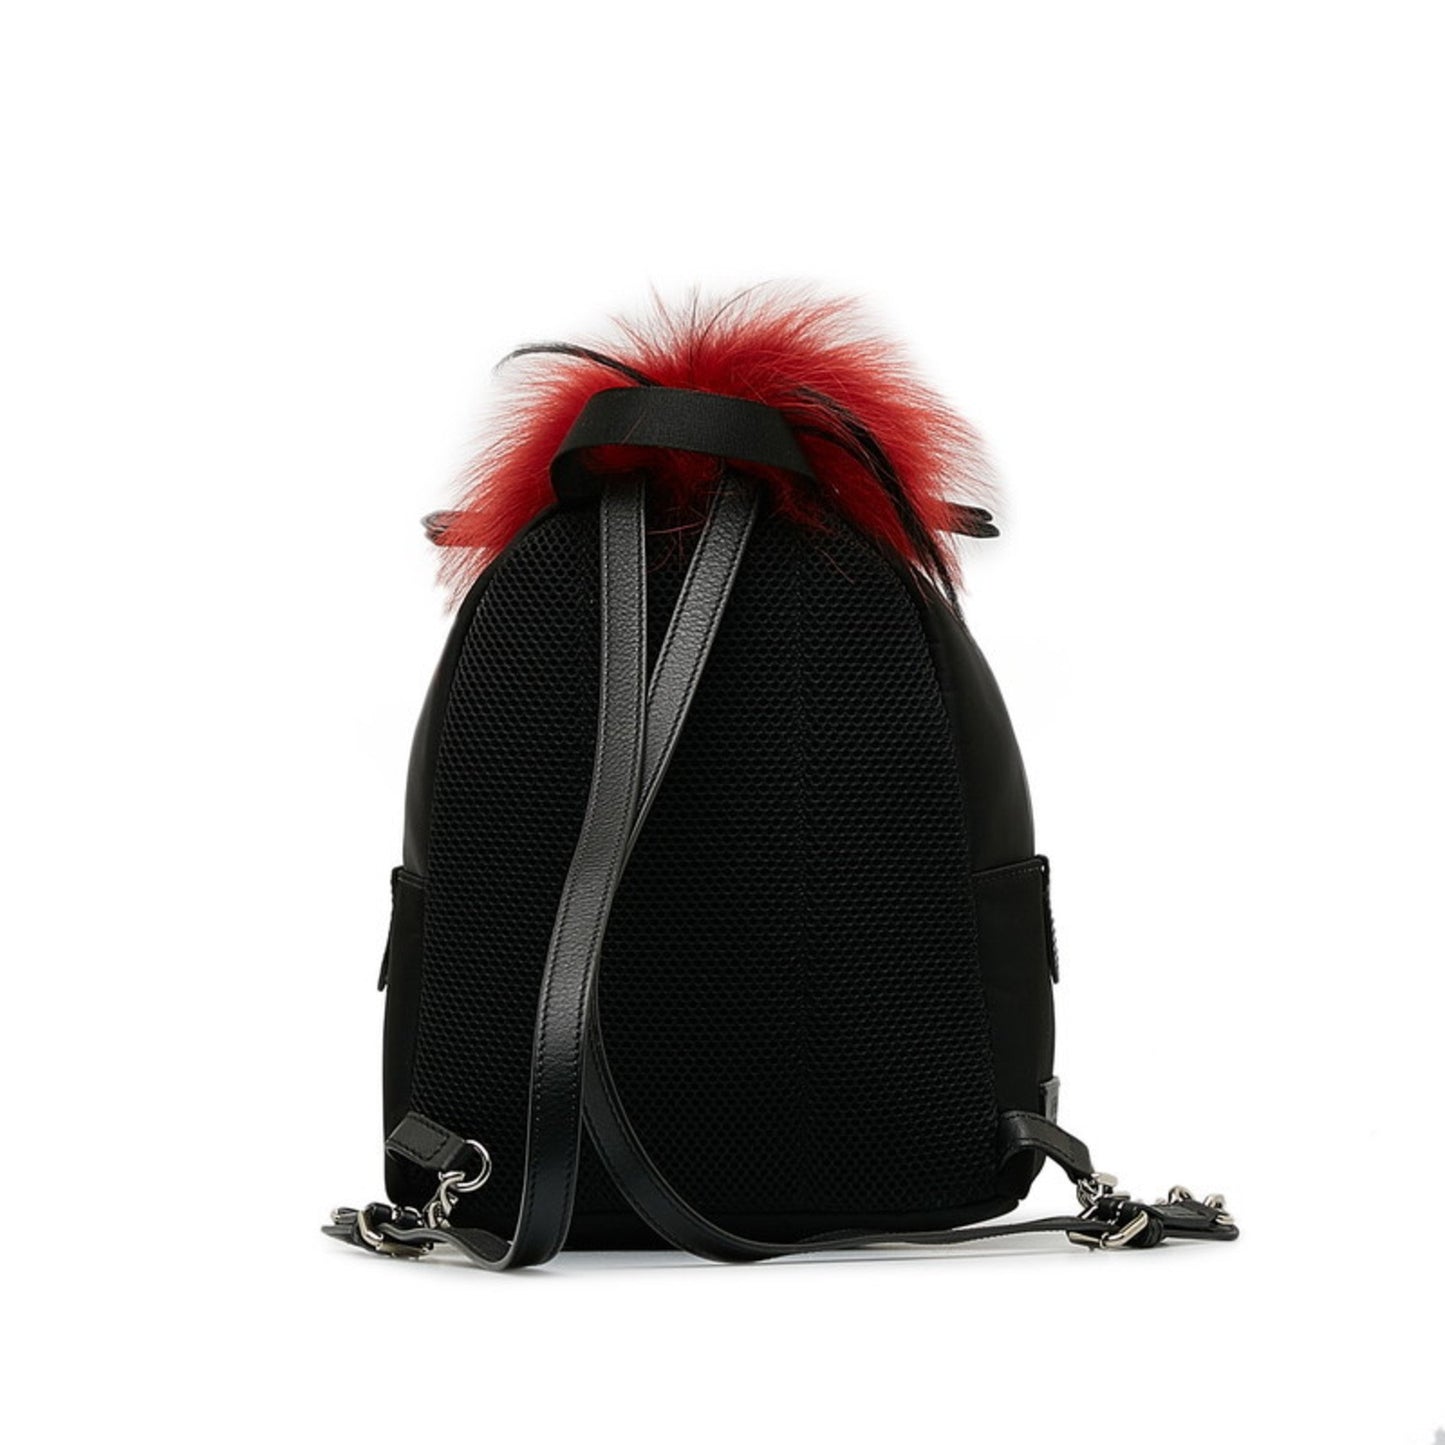 Fendi Women's Timeless Black Leather Backpack with Unique Design and Excellent Condition in Black